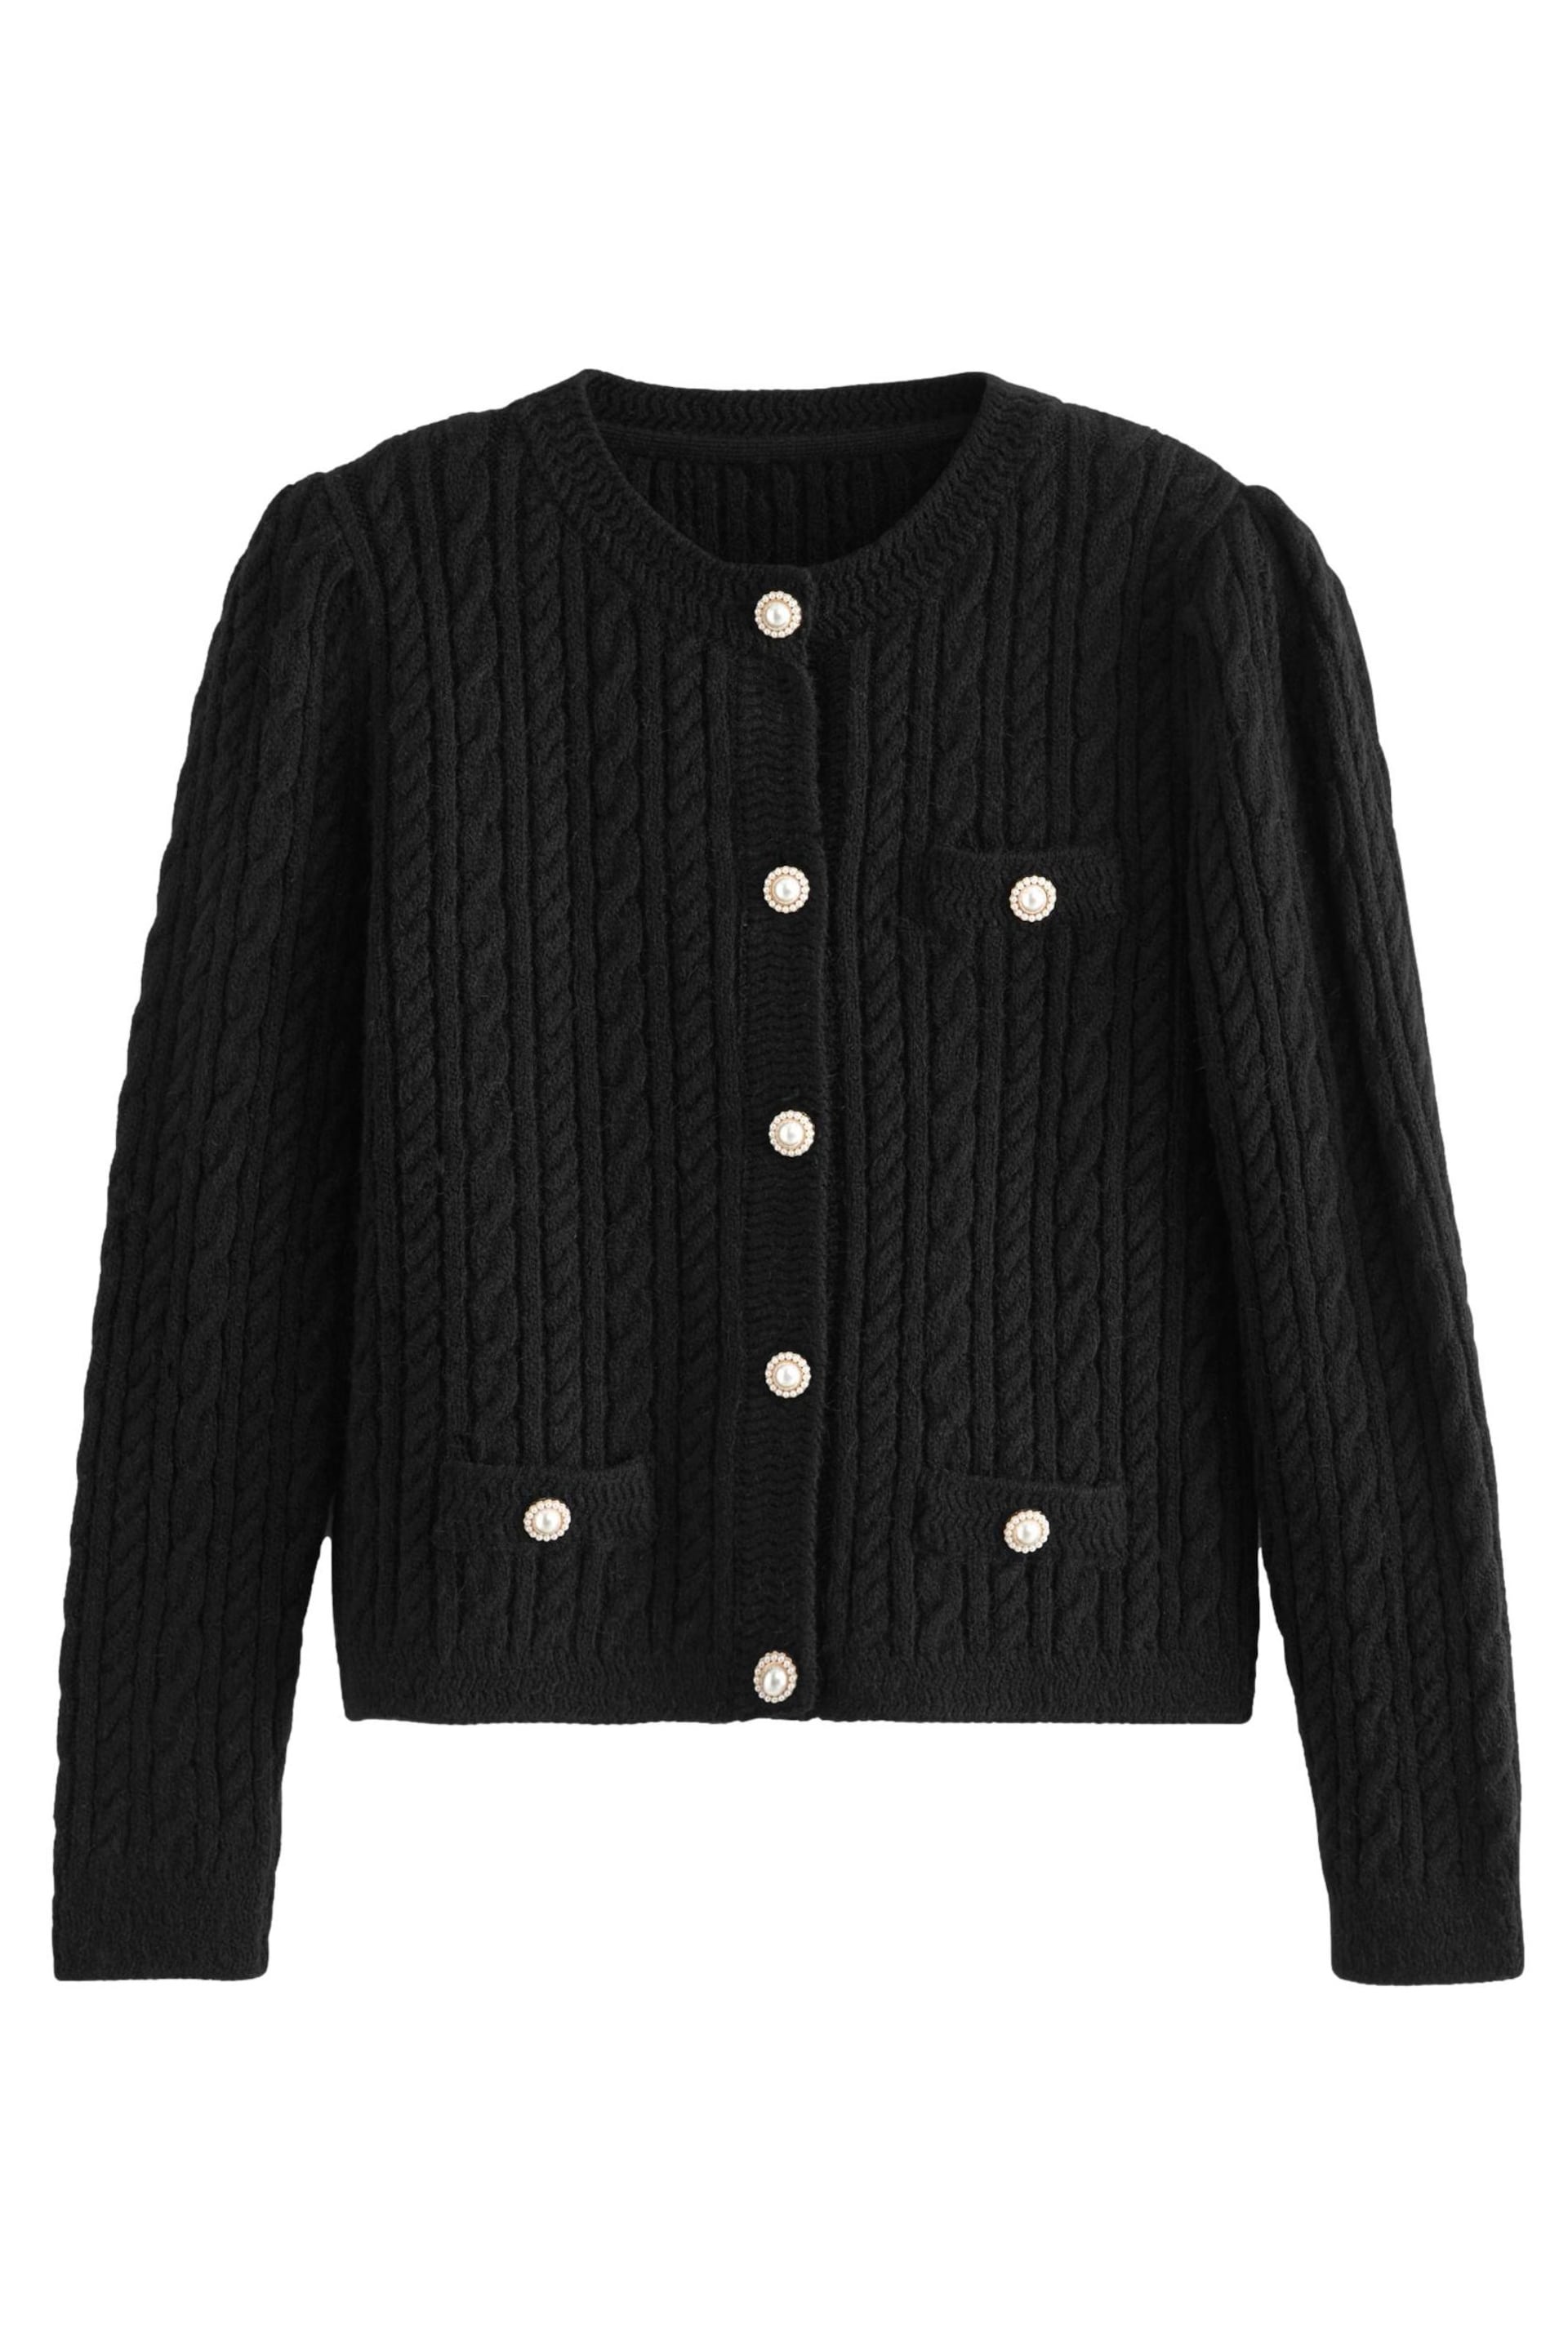 Black Cardigan With Pearl Effect Buttons - Image 5 of 6